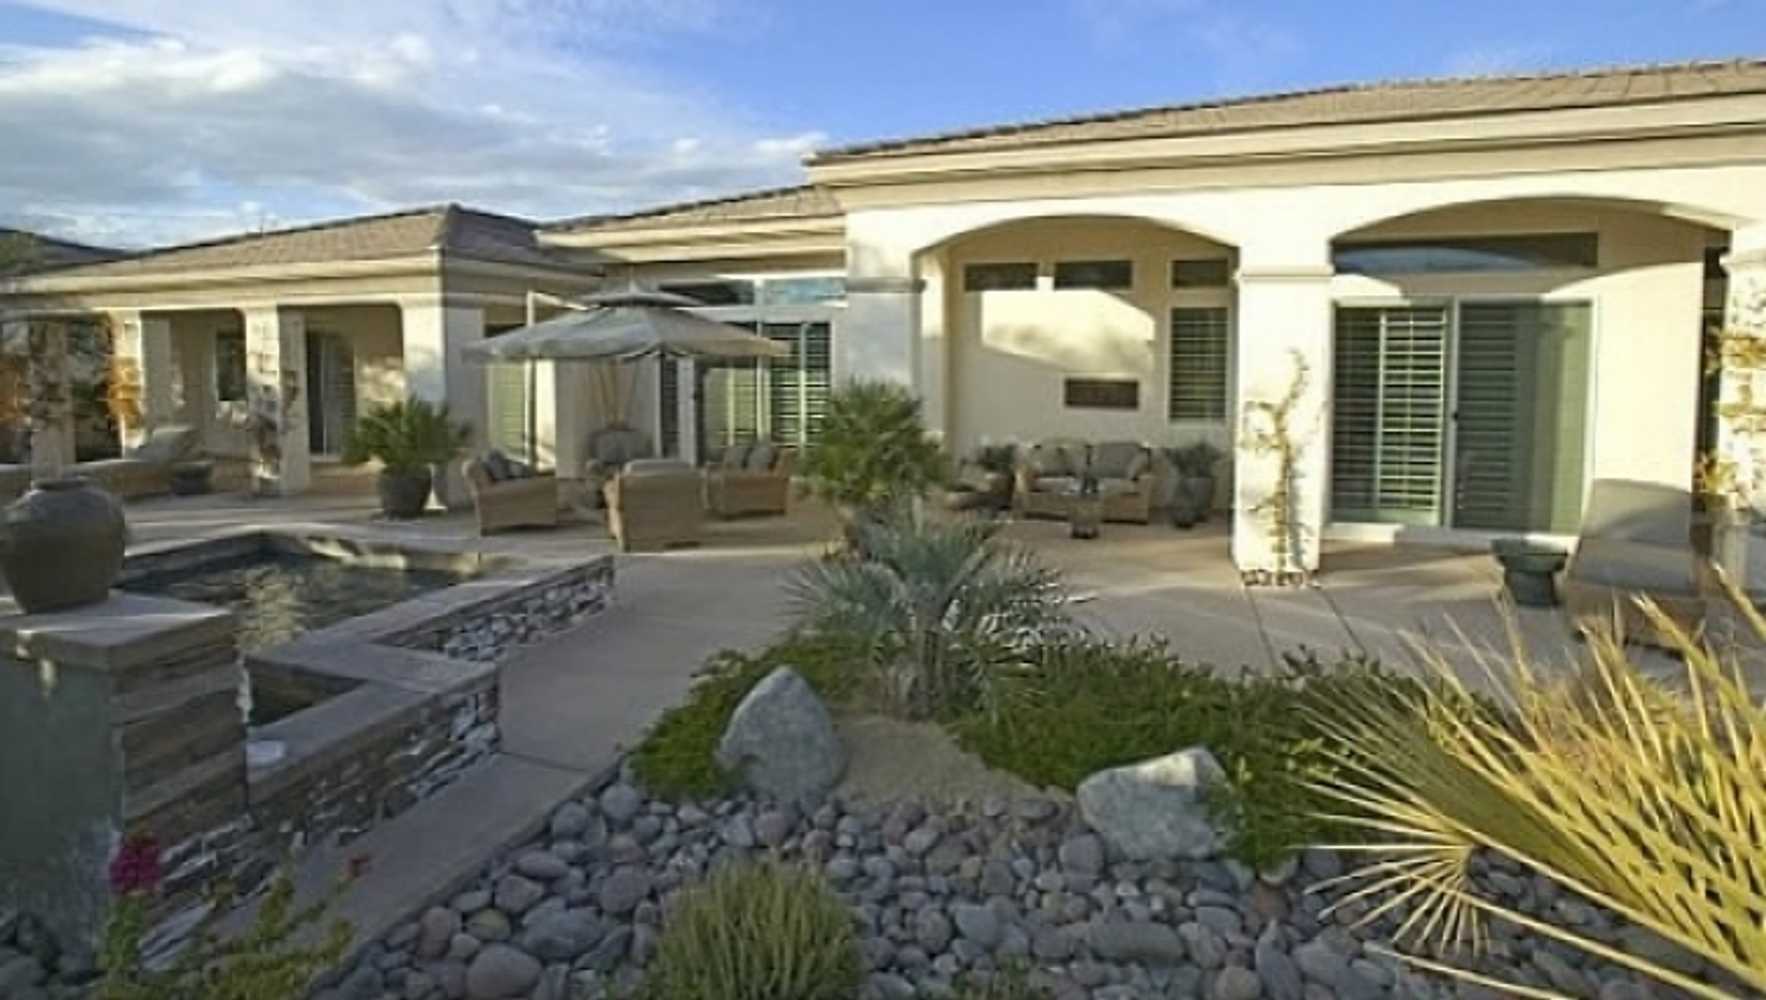 Residential Landscaping Photos